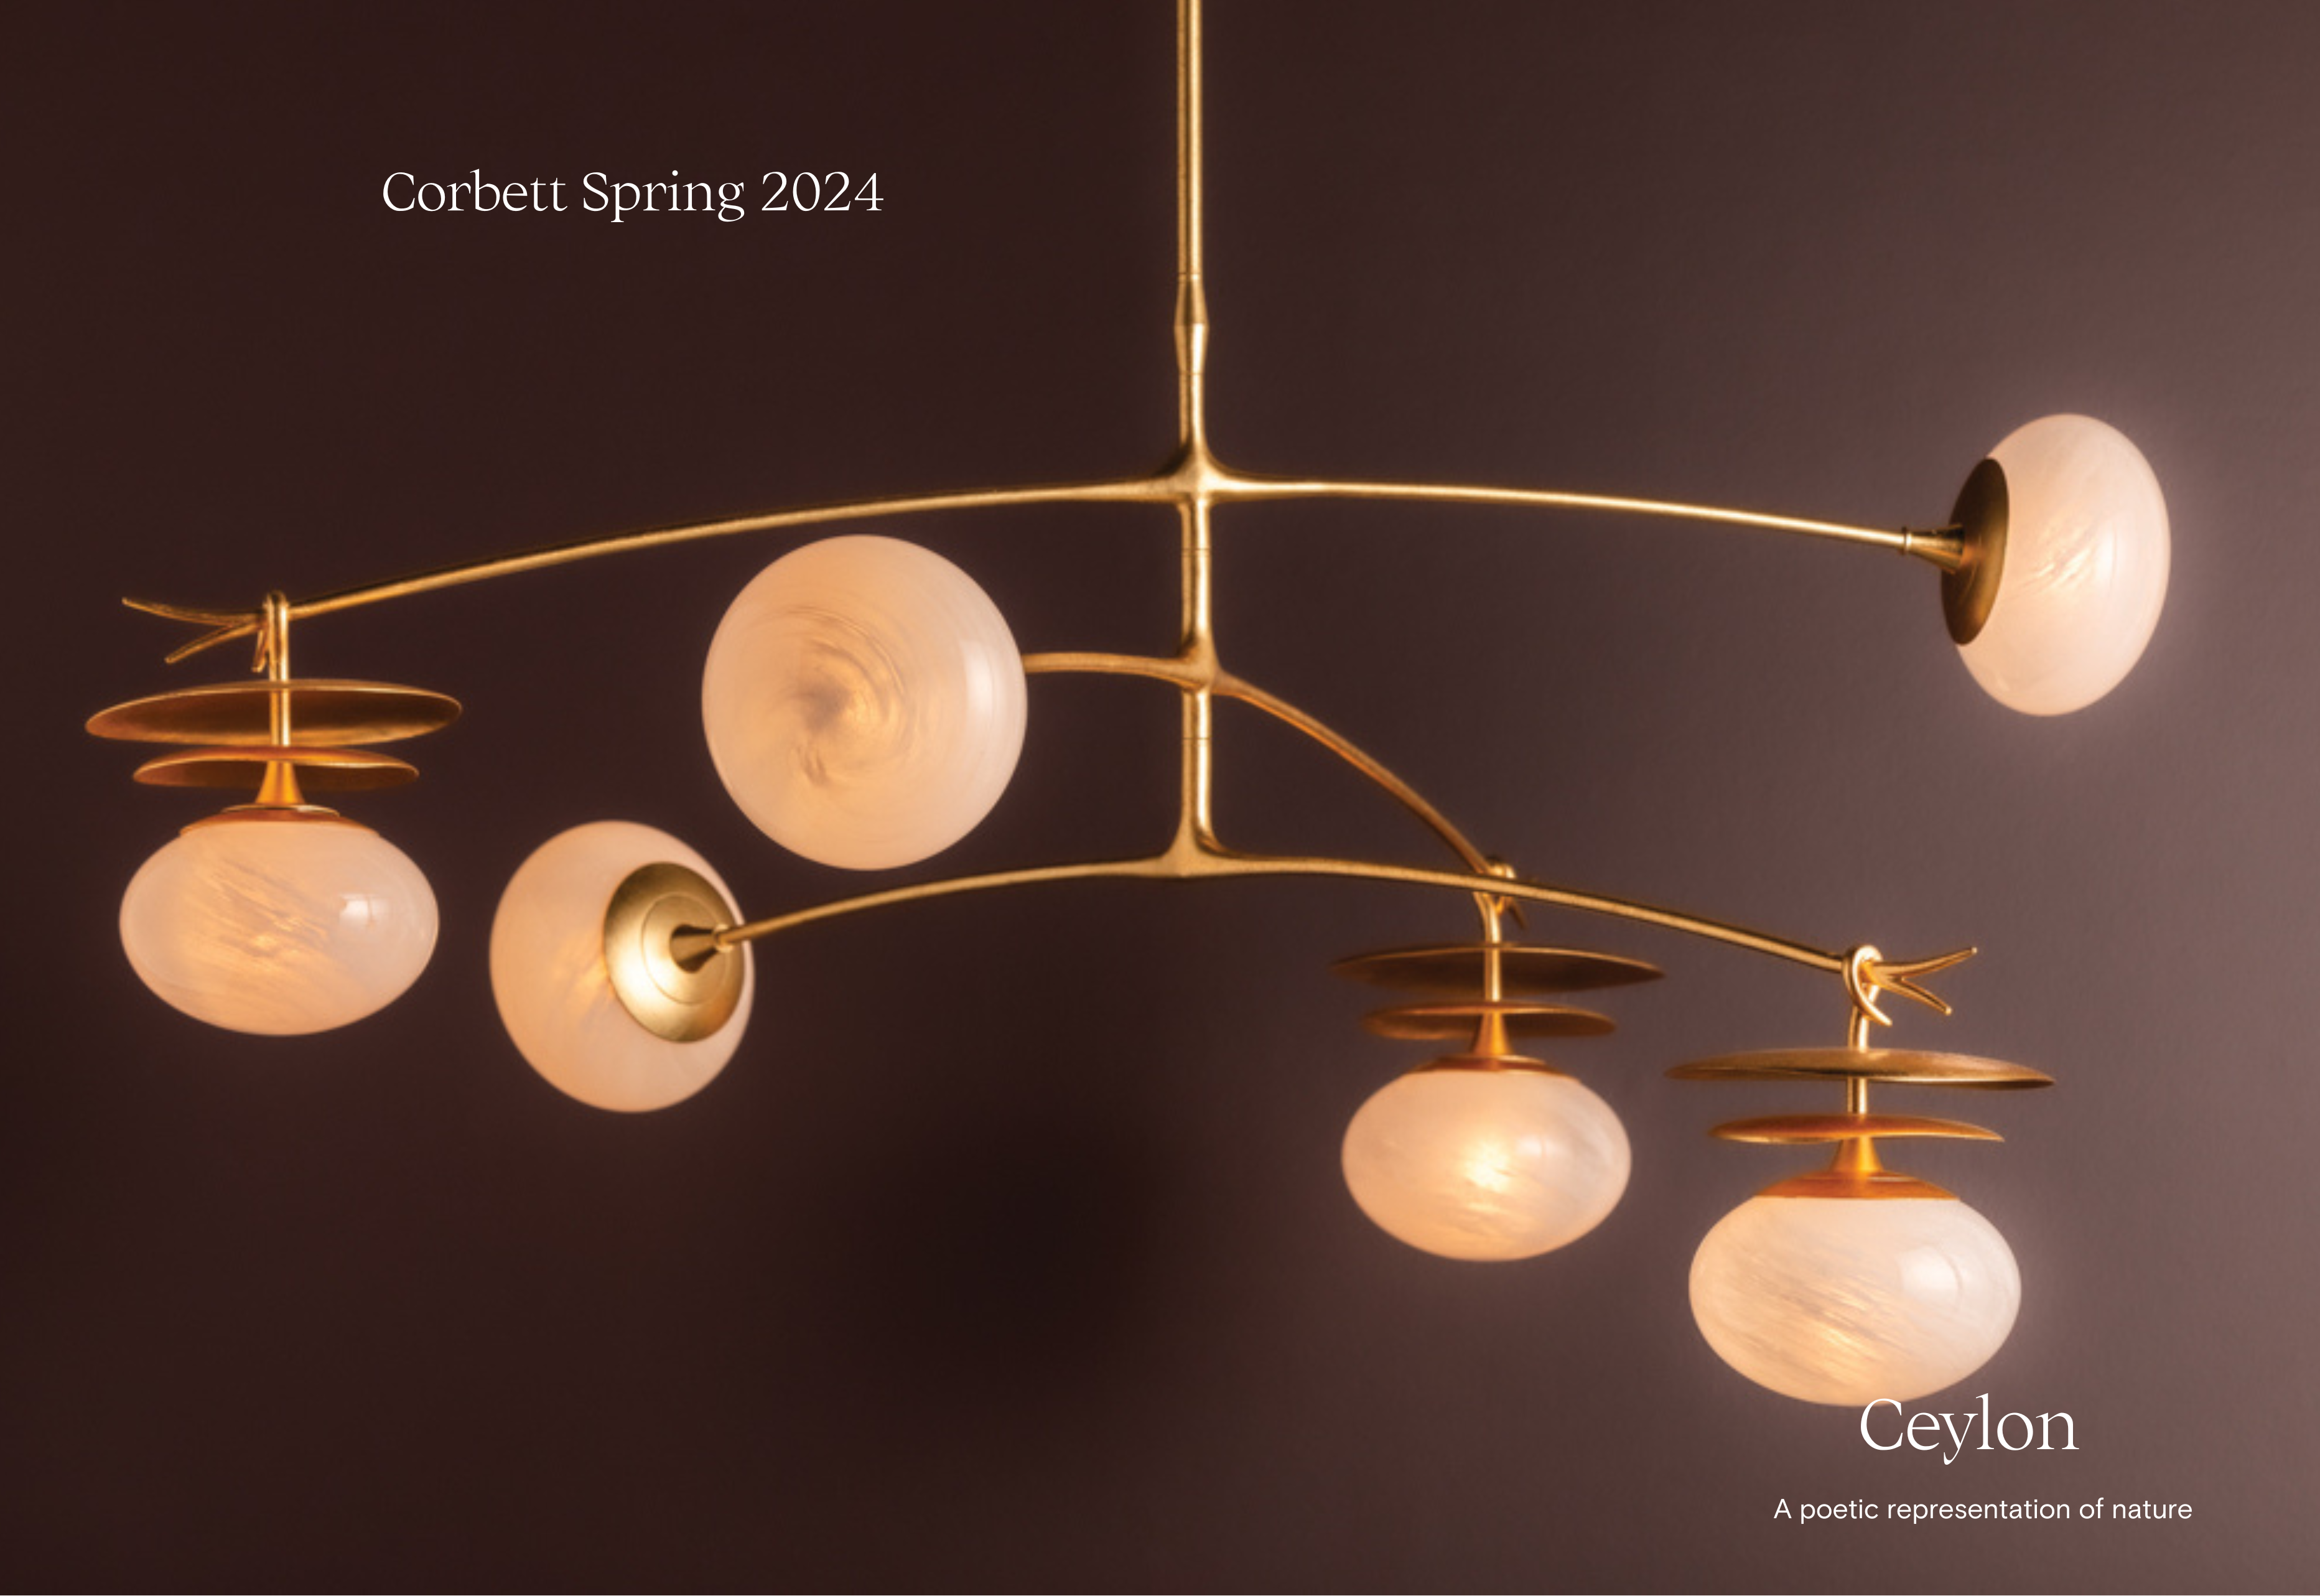 Large gold Ceylon chandelier with round globes and gold discs on a purple backdrop by Corbett Lighting